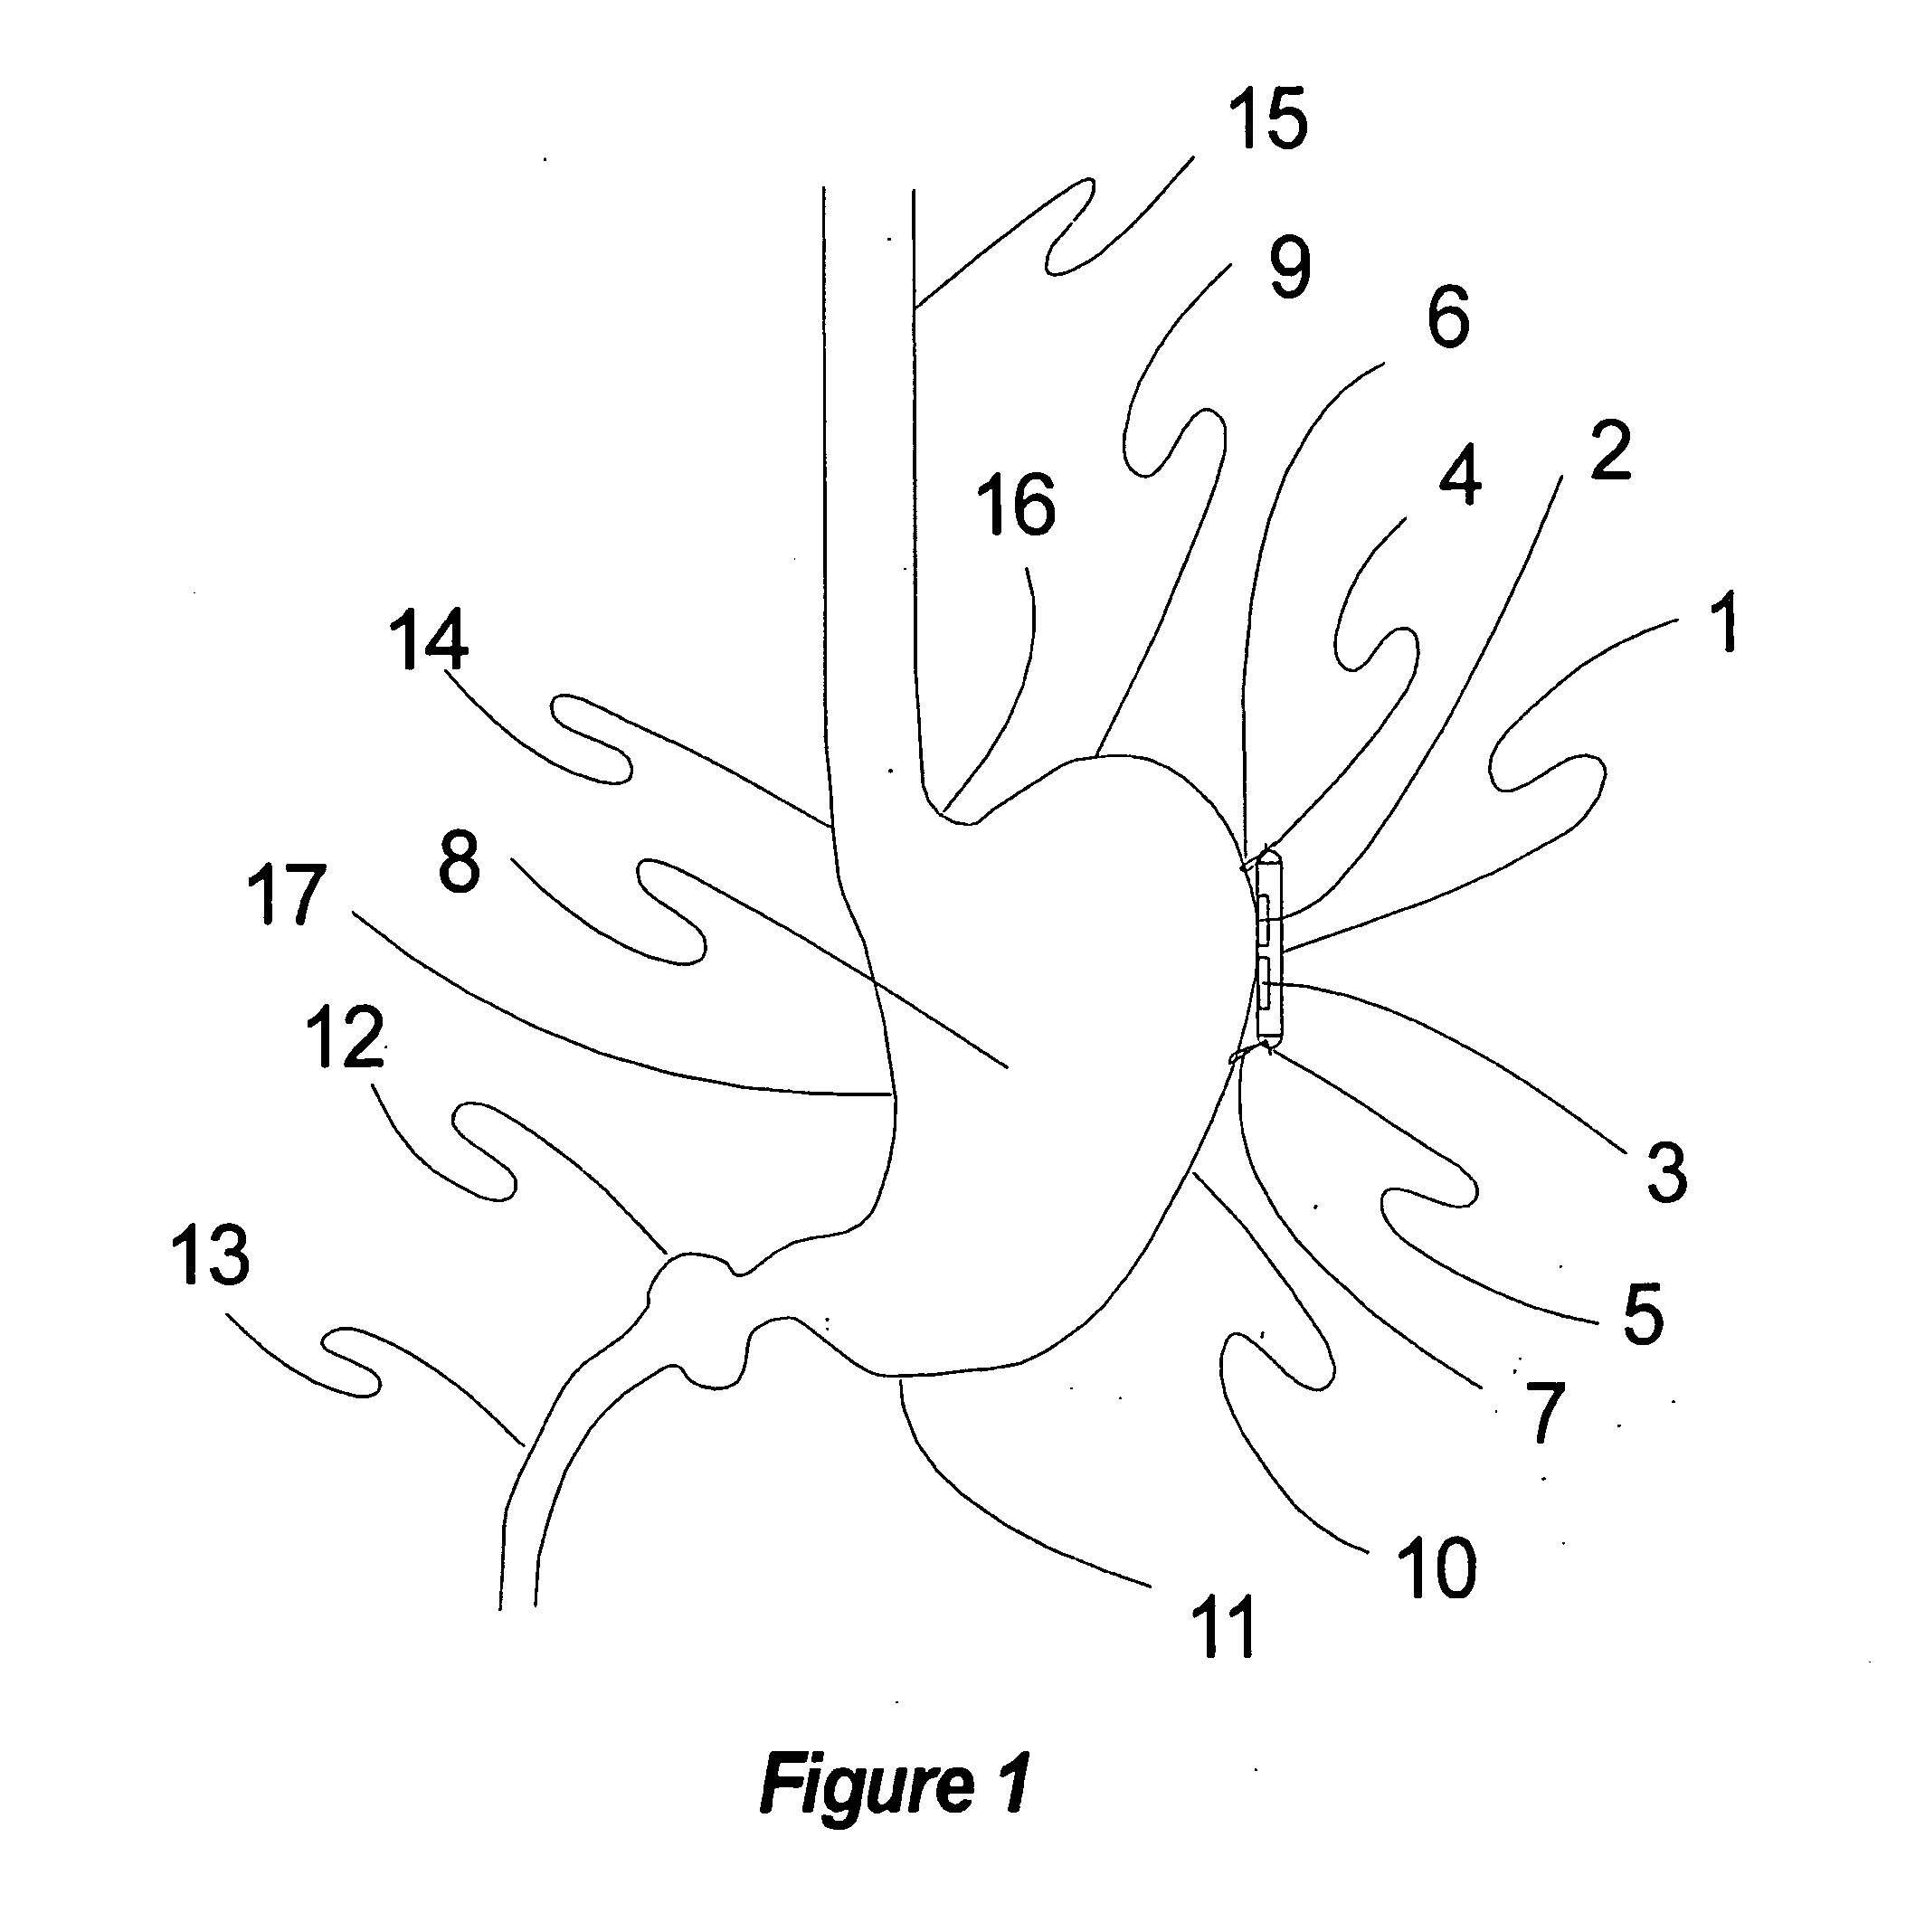 Method, apparatus, surgical technique, and stimulation parameters for autonomic neuromodulation for the treatment of obesity